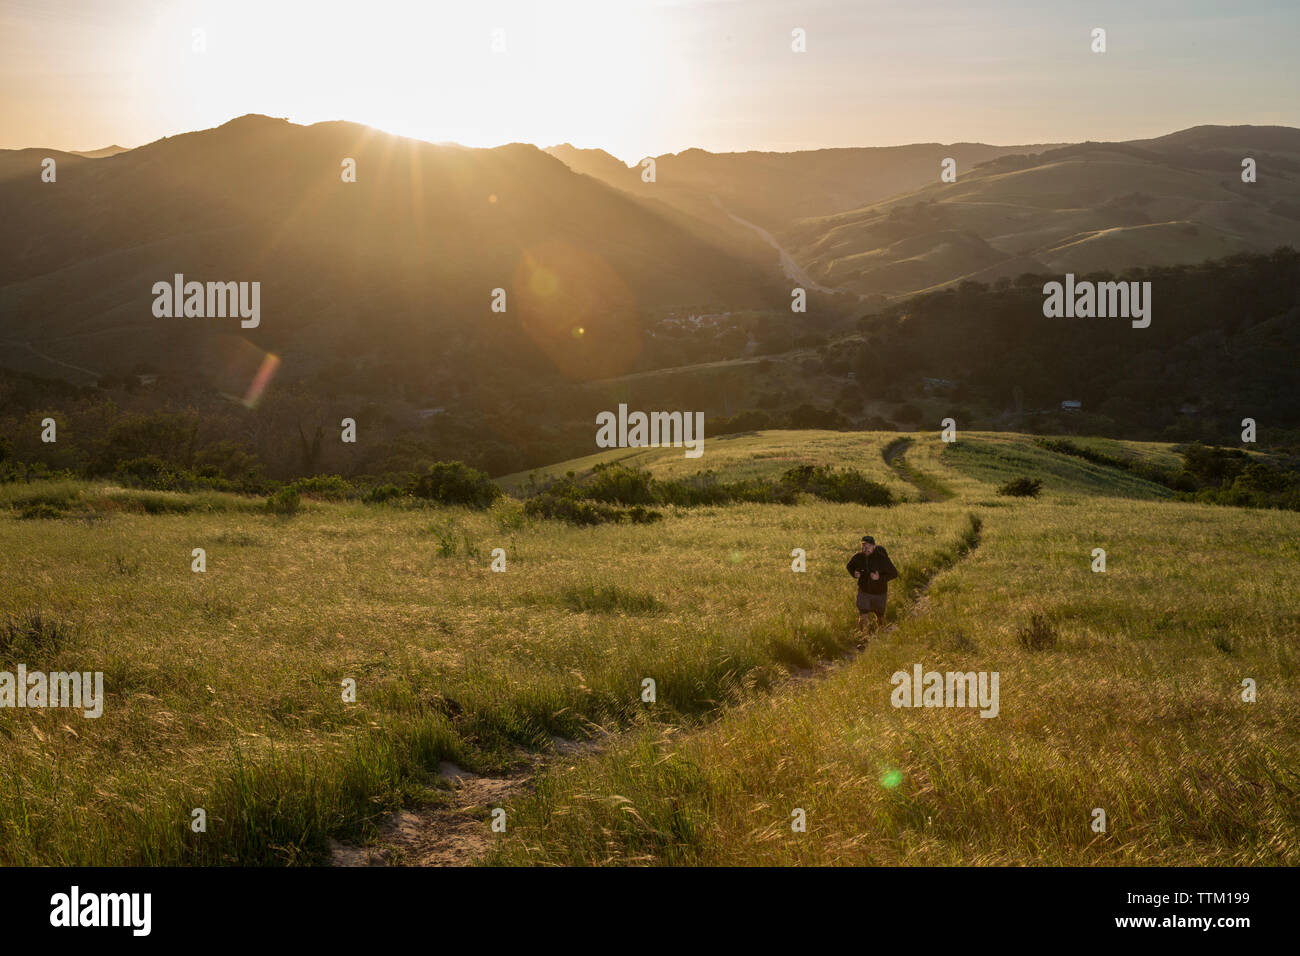 High angle view of man on trail amidst grassy field against mountains during sunset Stock Photo